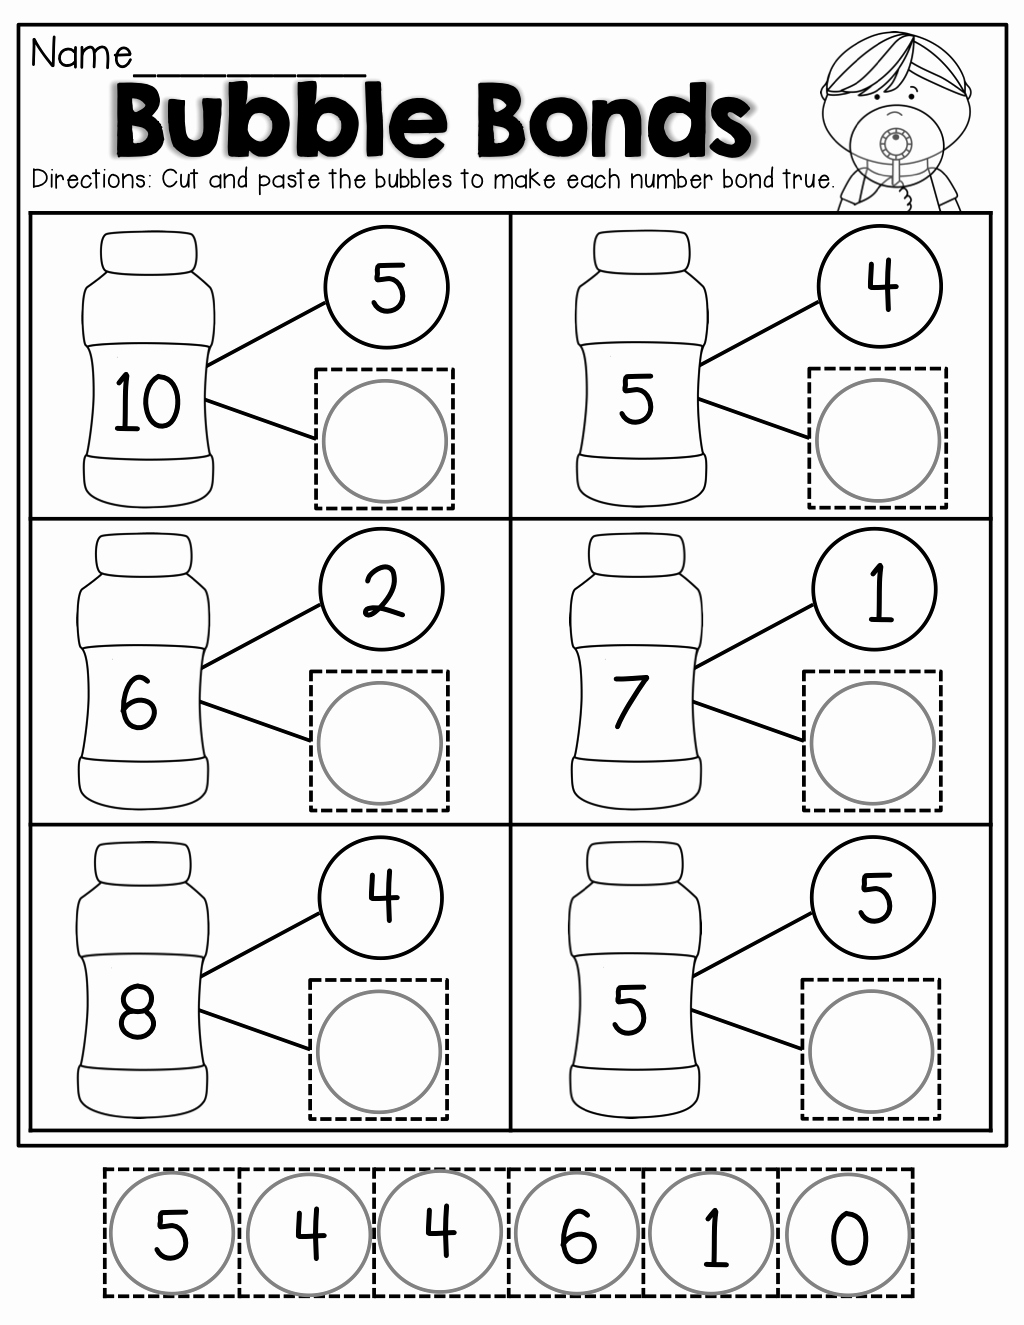 Number Bonds to 10 Worksheet New Number Bubble Bonds Cut and Paste